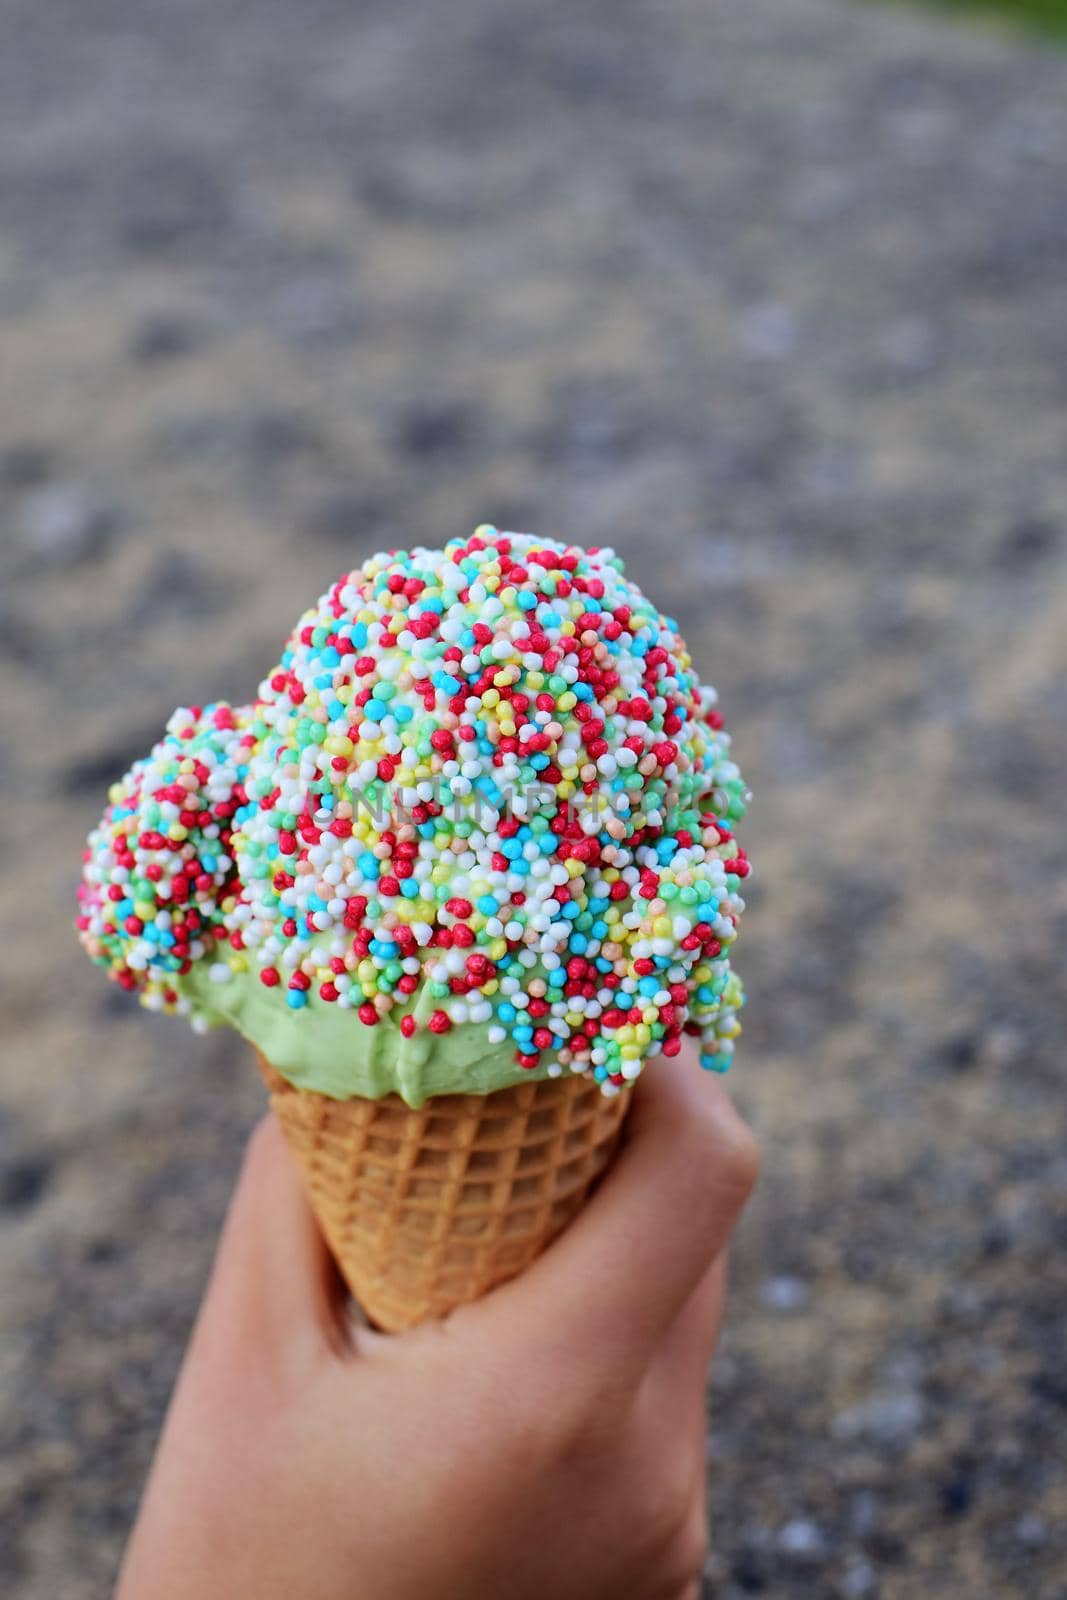 Ice cream with colorful sugar sprinkles in hand as a close-up against a grey blurred background